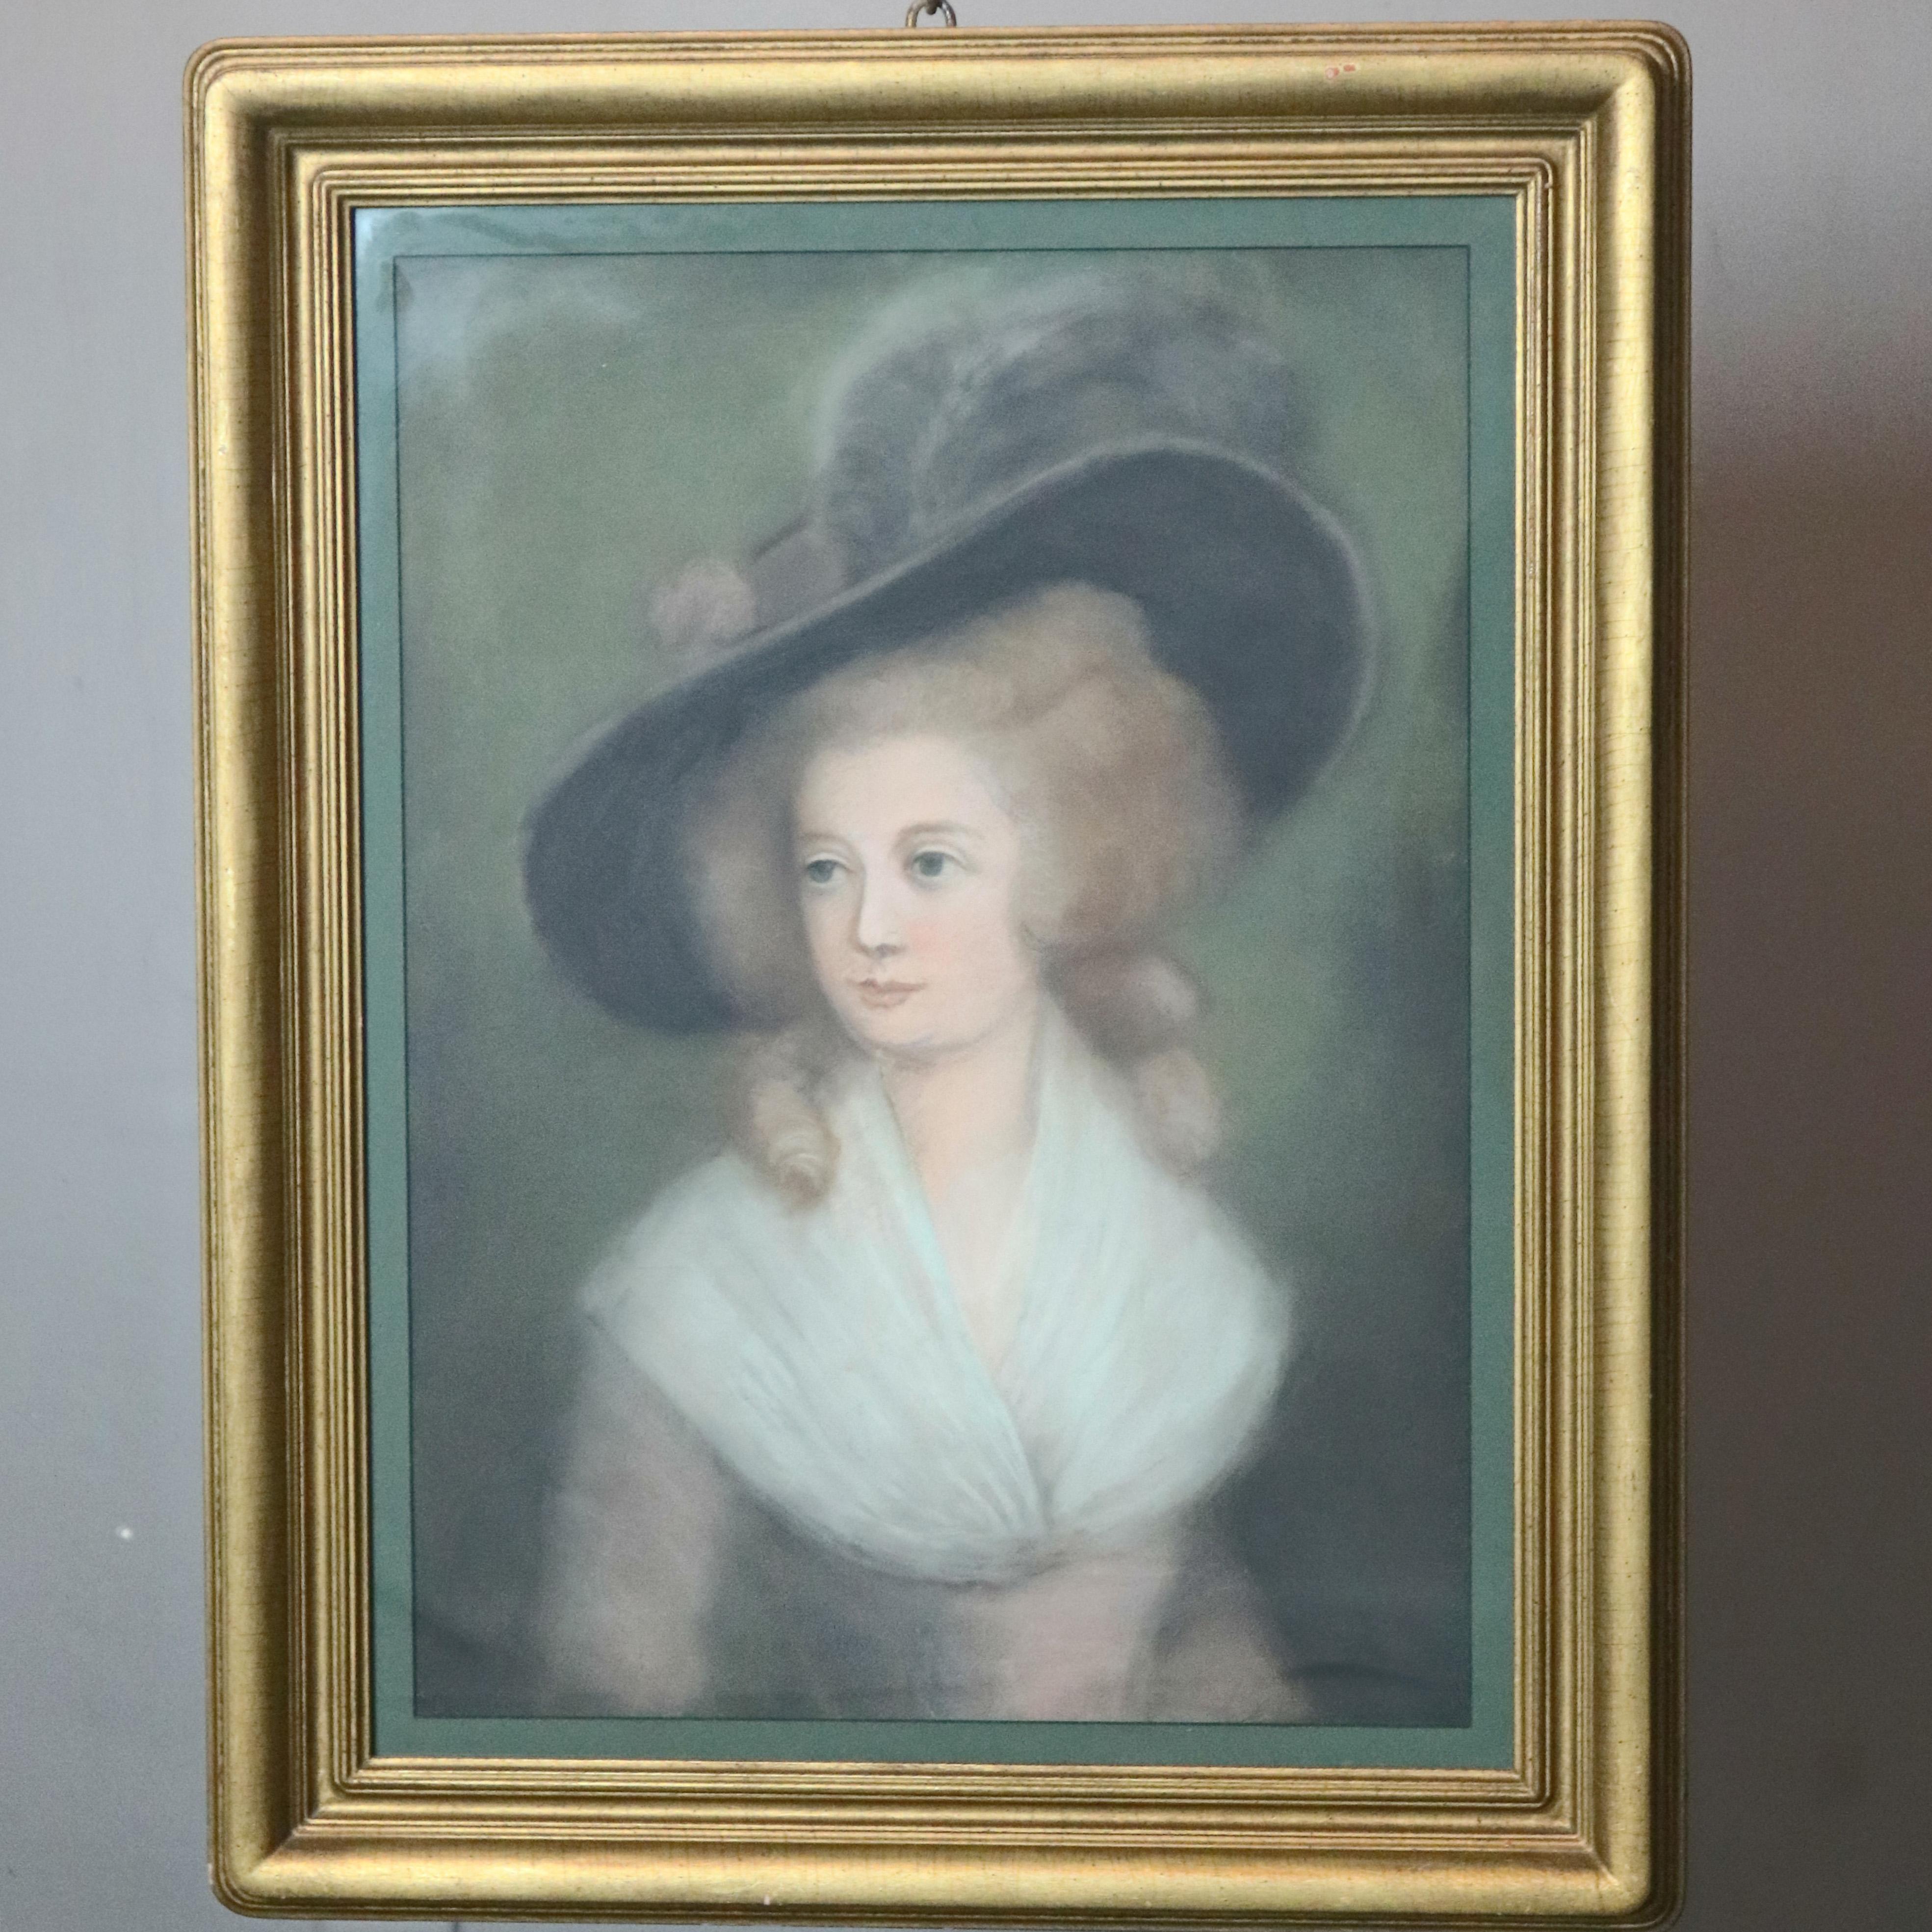 An antique pastel portrait painting of Victorian maiden in feathered hat, seated in giltwood frame, 20th century

DELIVERY NOTICE – Due to COVID-19 we are employing NO-CONTACT PRACTICES in the transfer of purchased items.  Additionally, for those